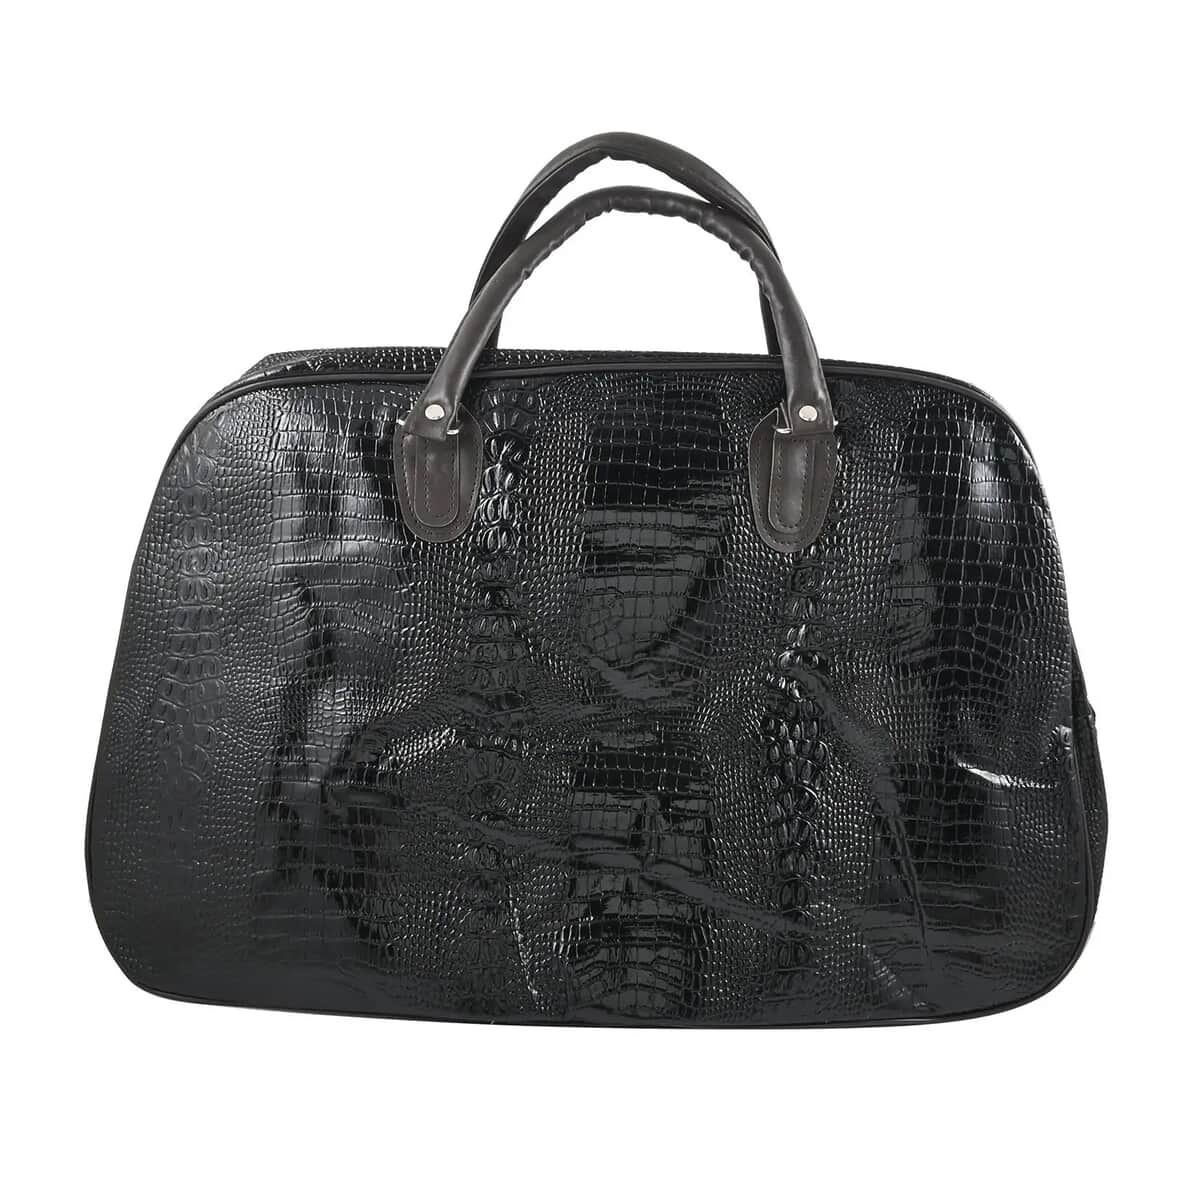 Black Crocodile Embossed Pattern Faux Leather Travel Bag with Handle Drop and Shoulder Strap image number 6